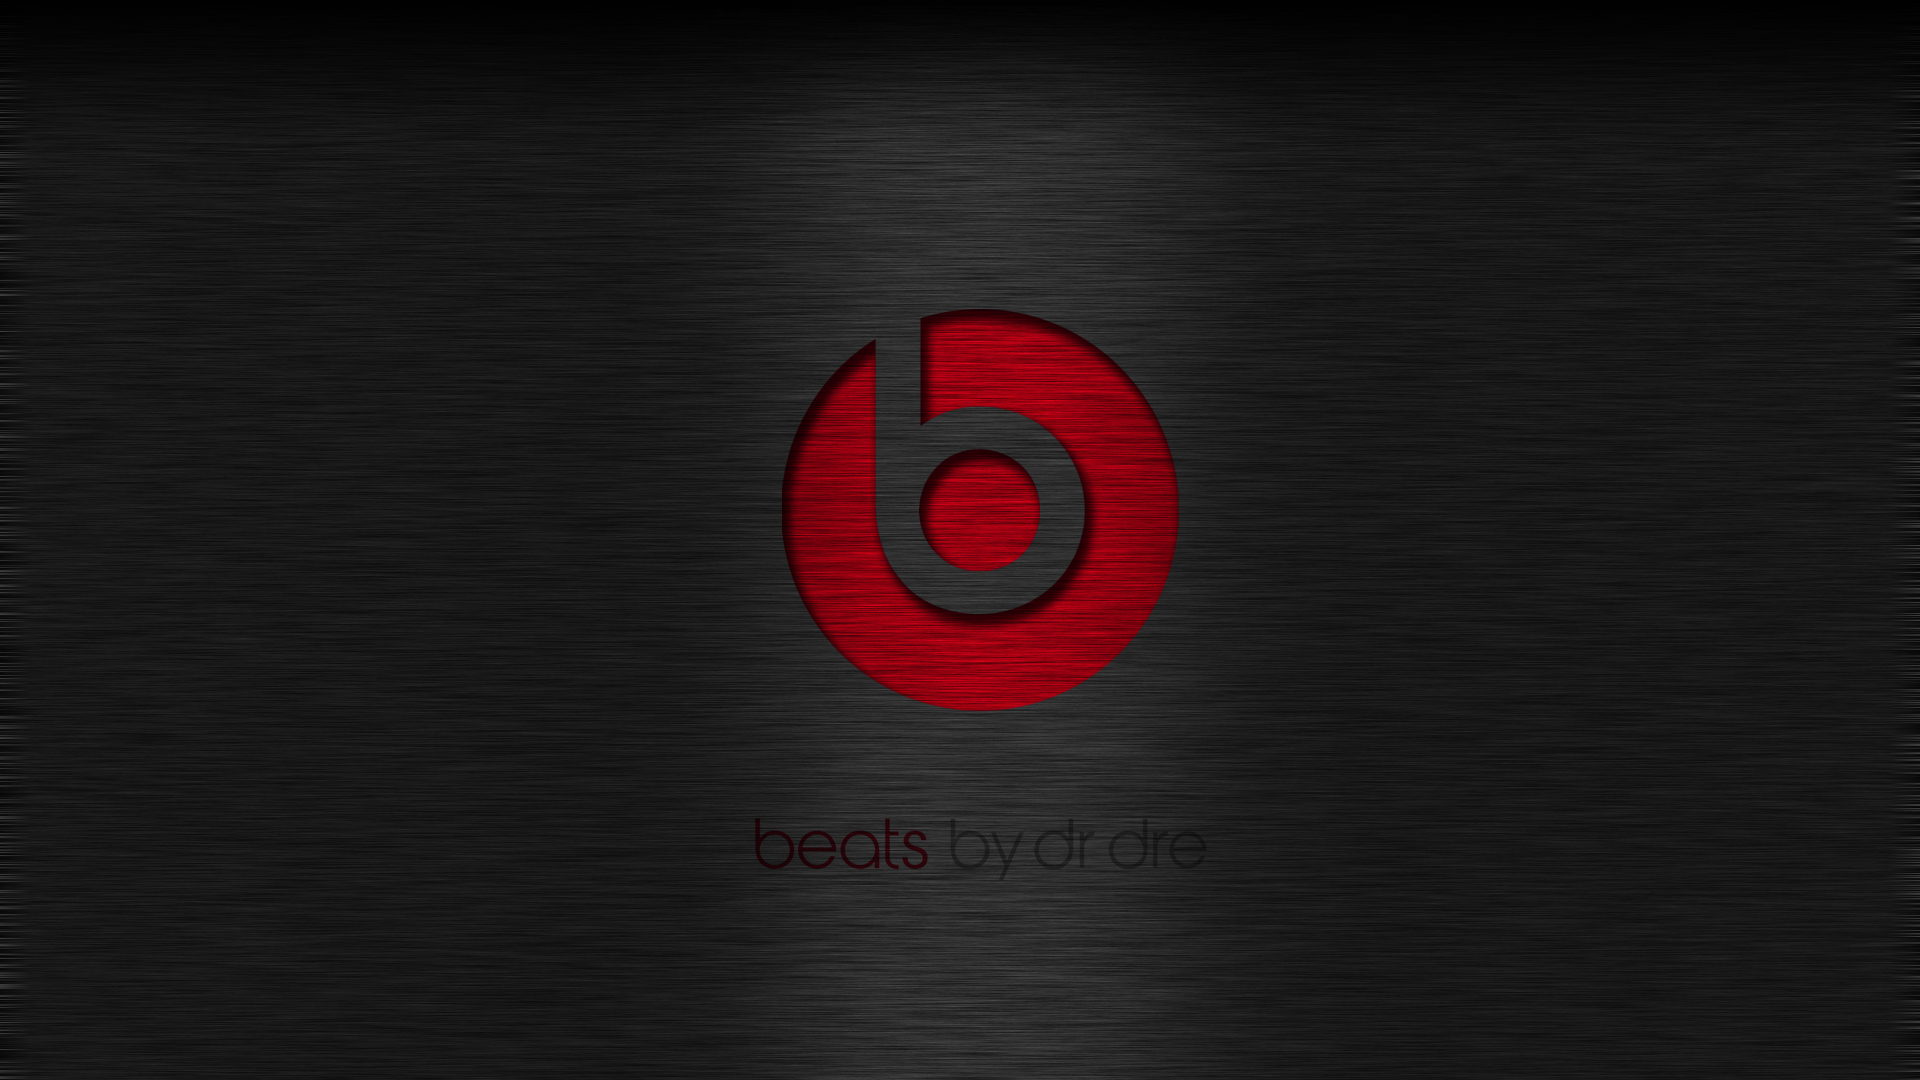 customization wallpaper other simple beats by dr dre wallpaper